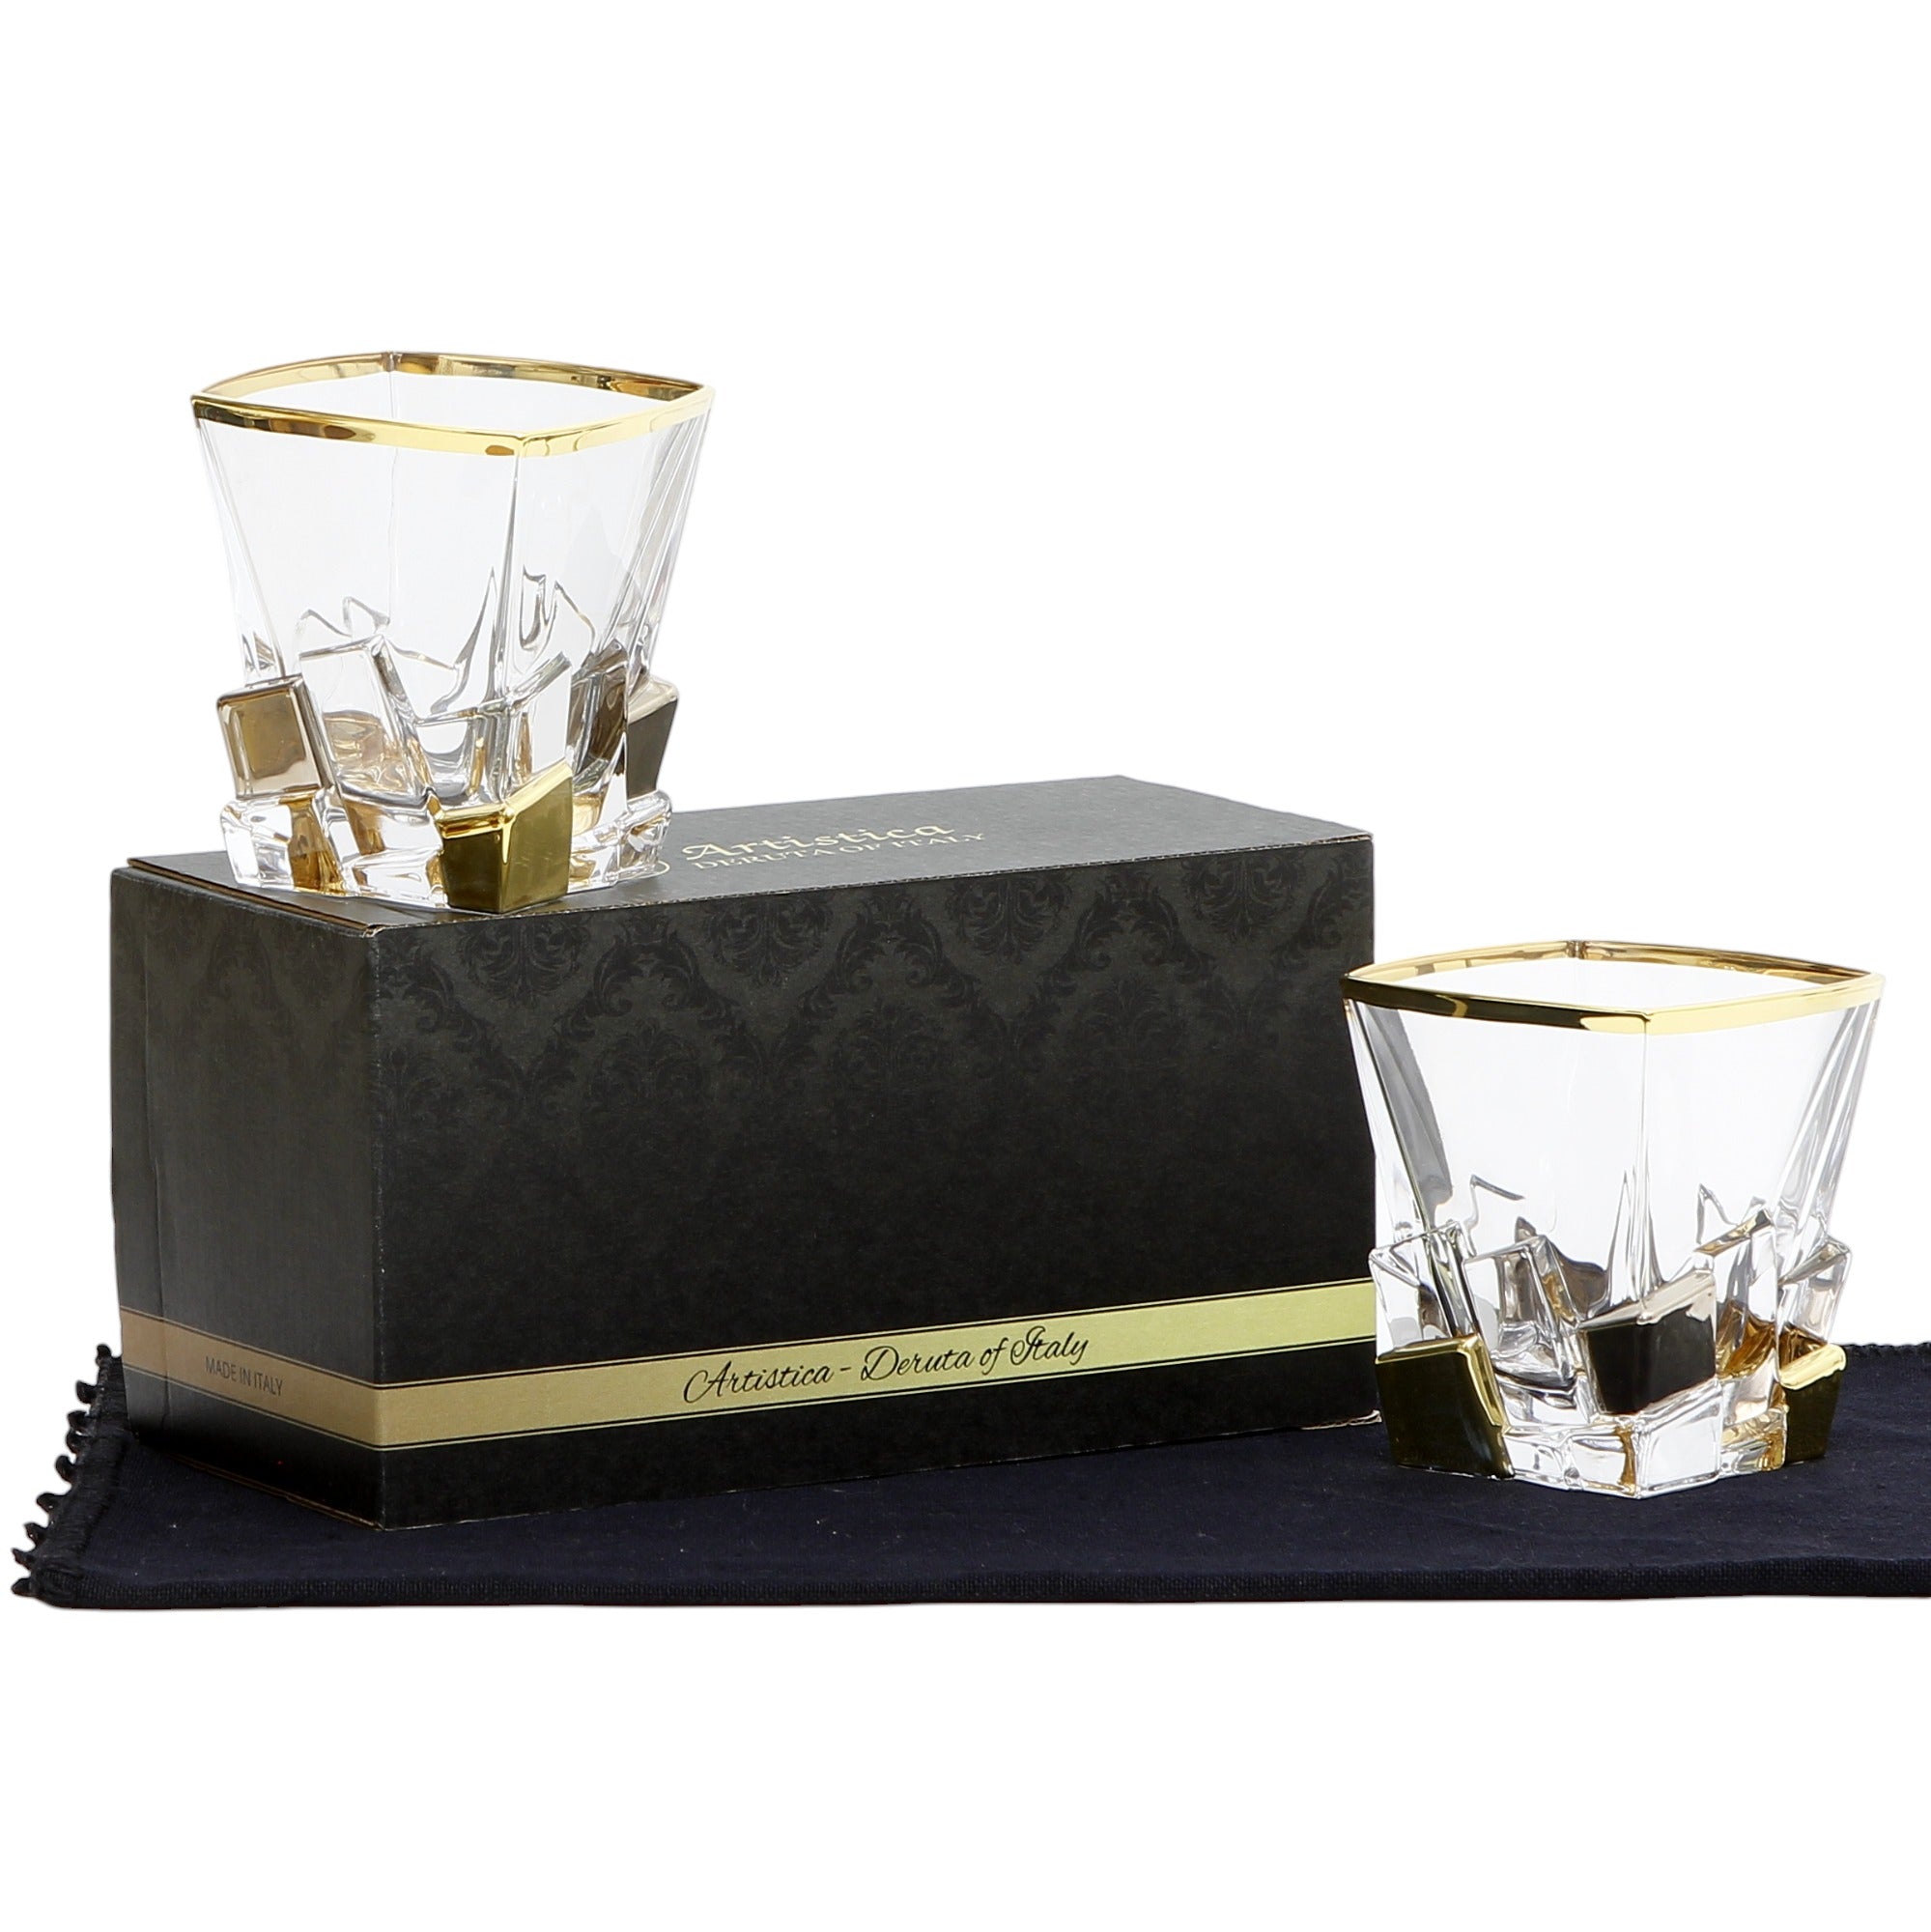 CRYSTAL GLASS: Exquisite Italian Crystal Square Glass for Whiskey/Old Fashion featuring a 24 Carat Gold Rim and Gold/Platinum Accents.